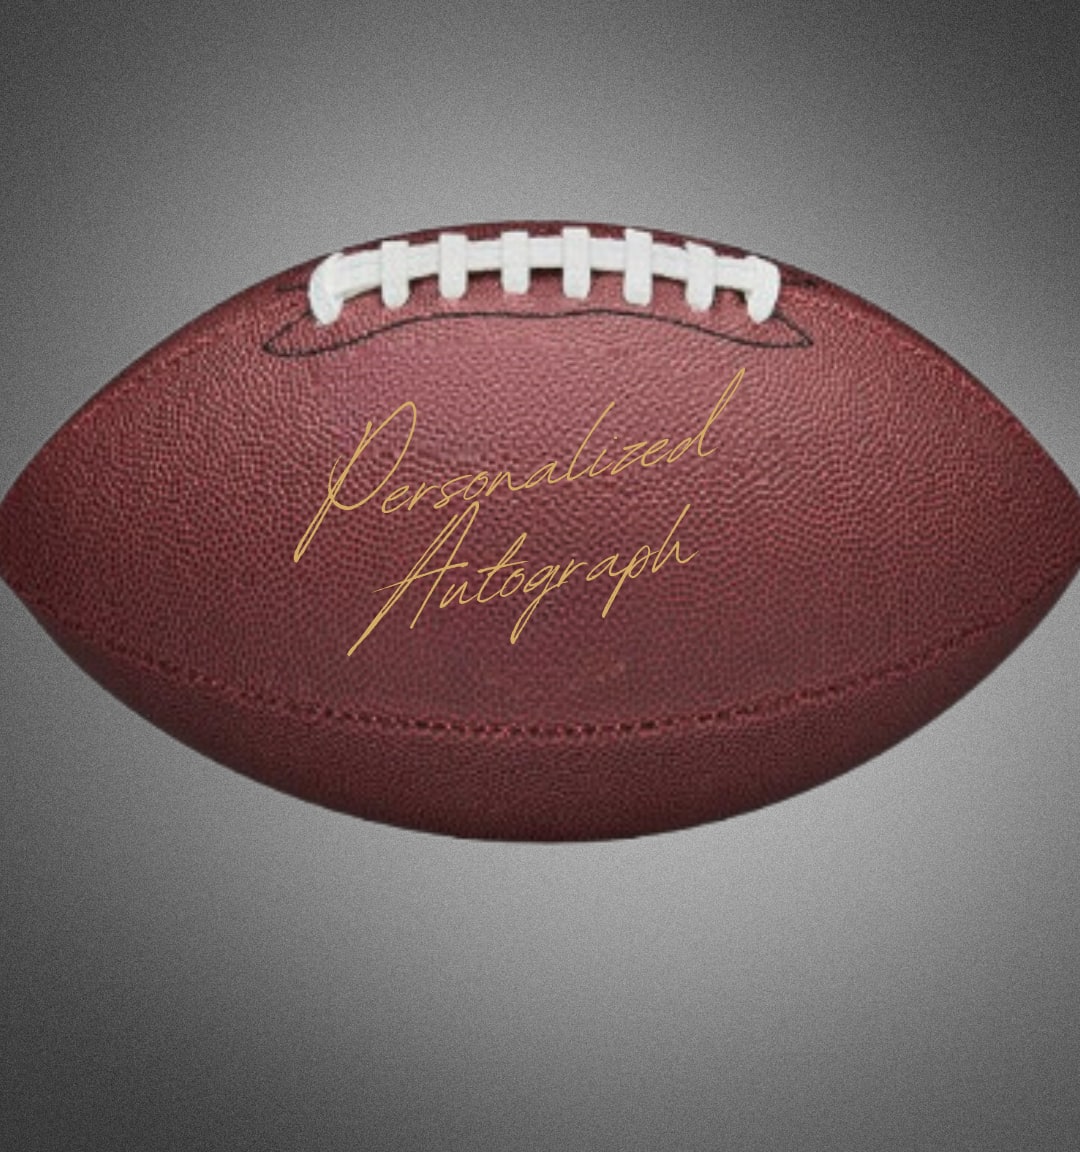 Limited Edition Adger Armstrong Autographed Football